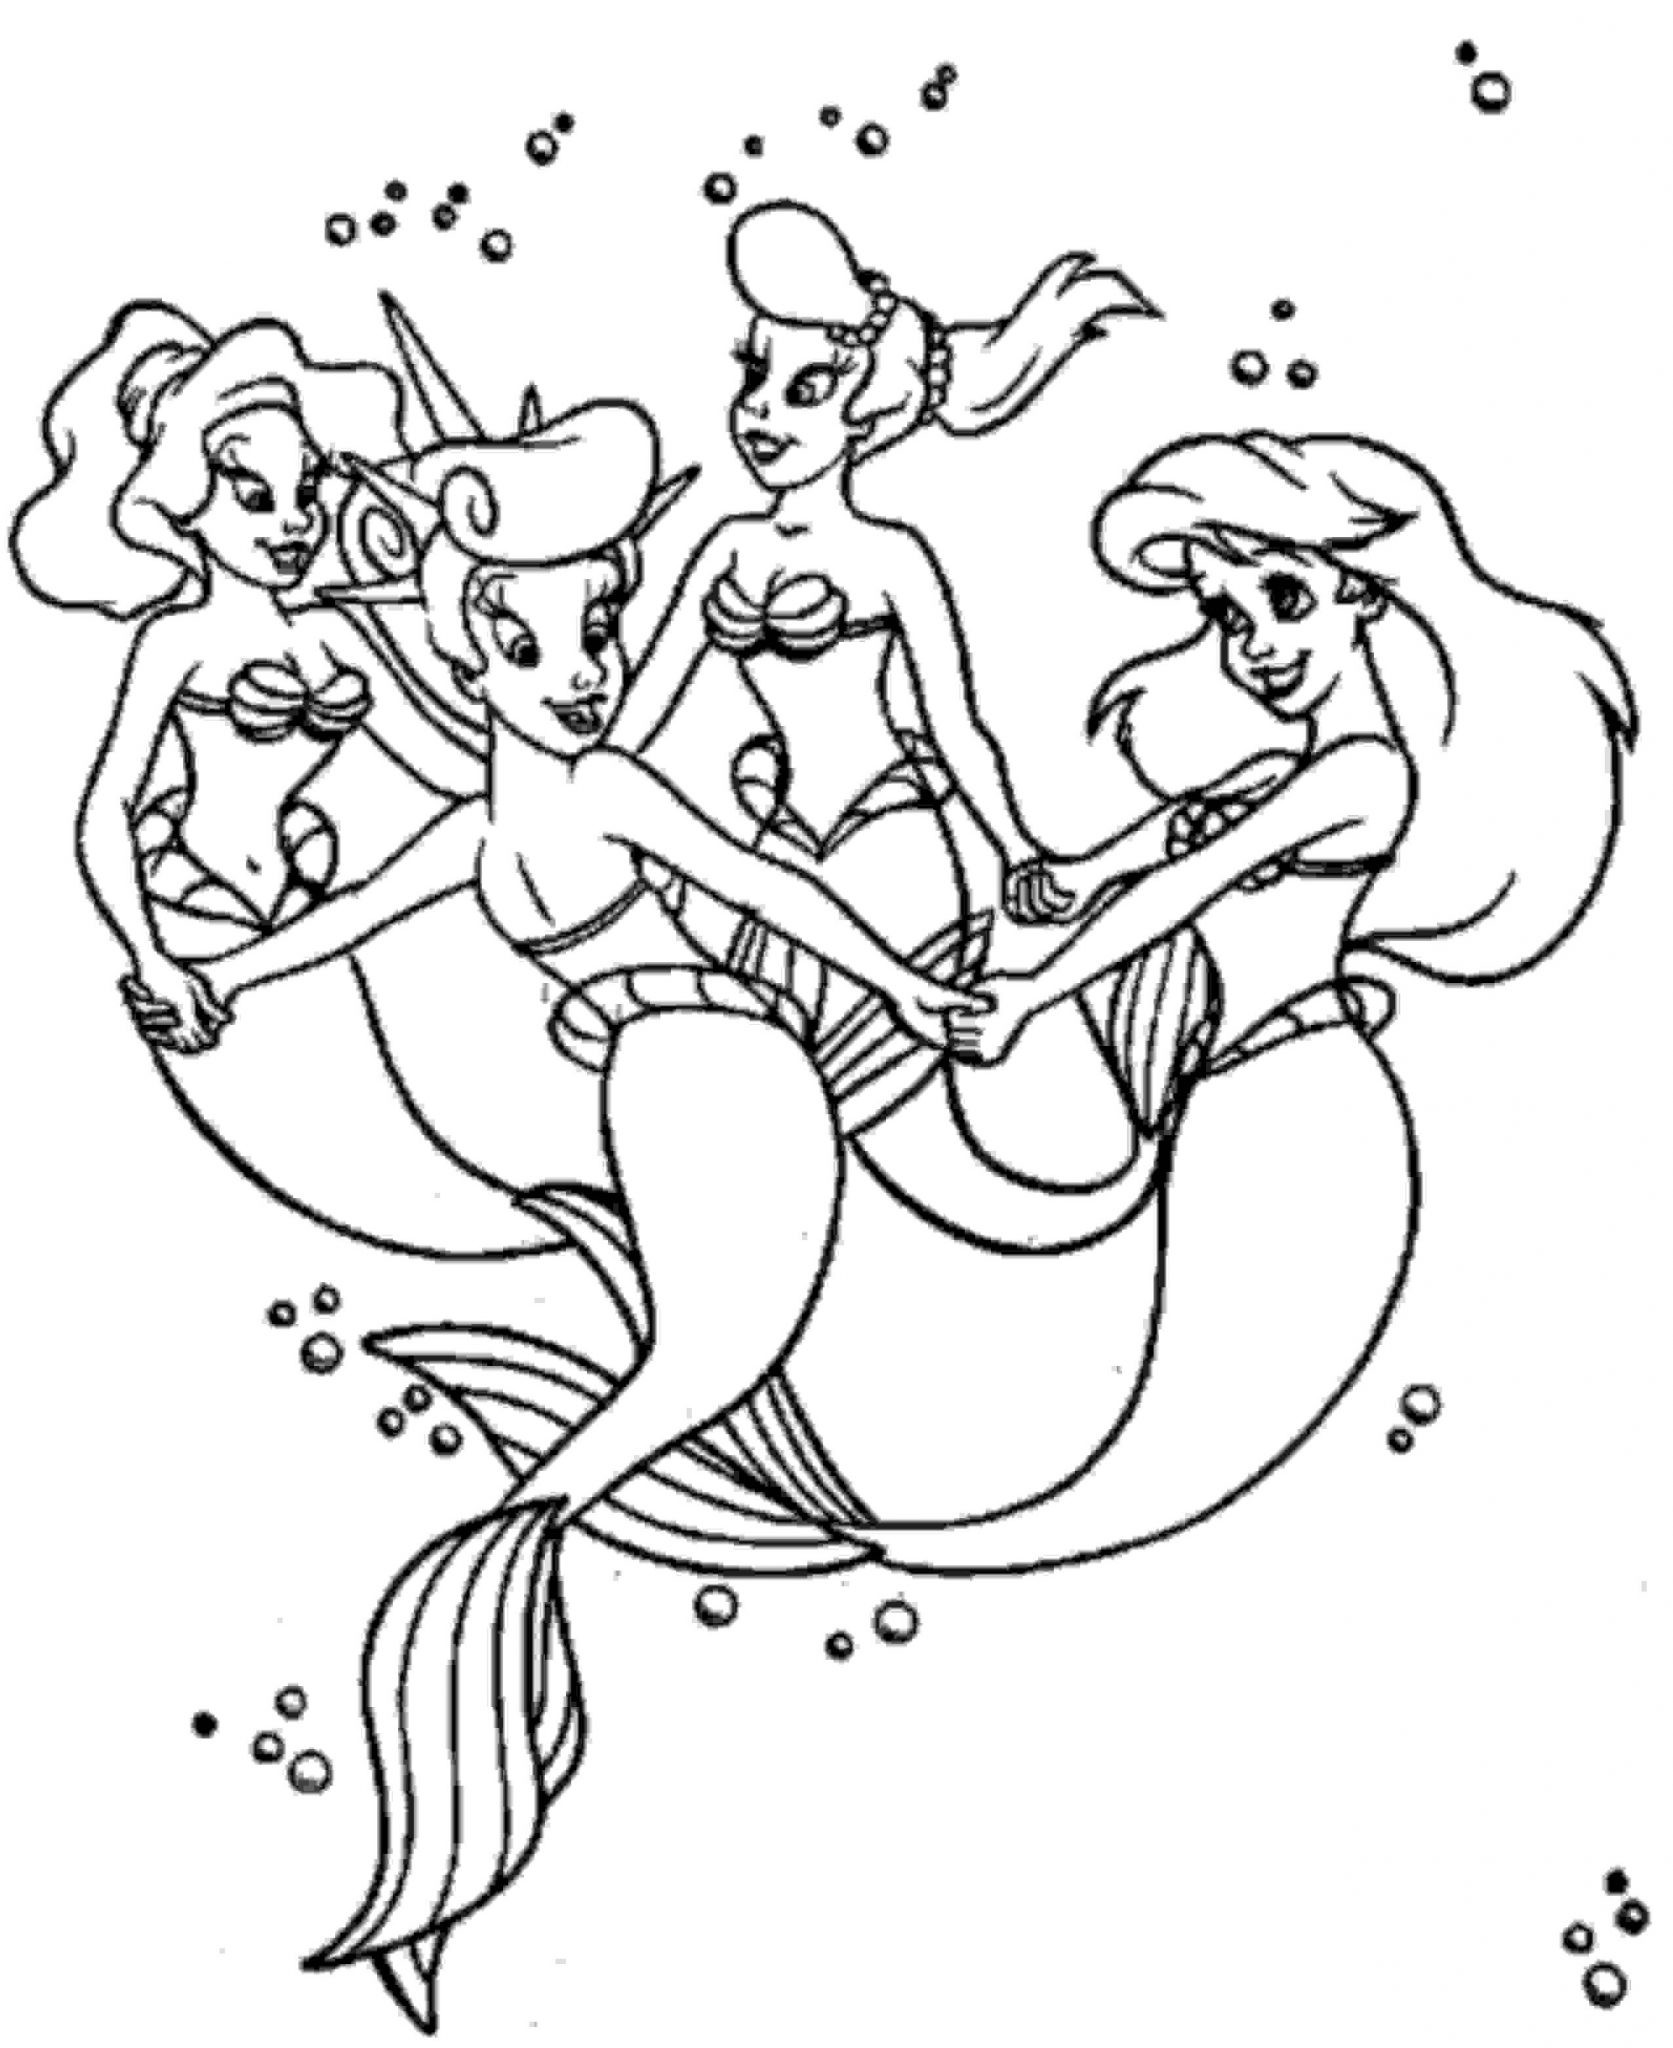 Kids Coloring Pages Mermaid
 Print & Download Find the Suitable Little Mermaid